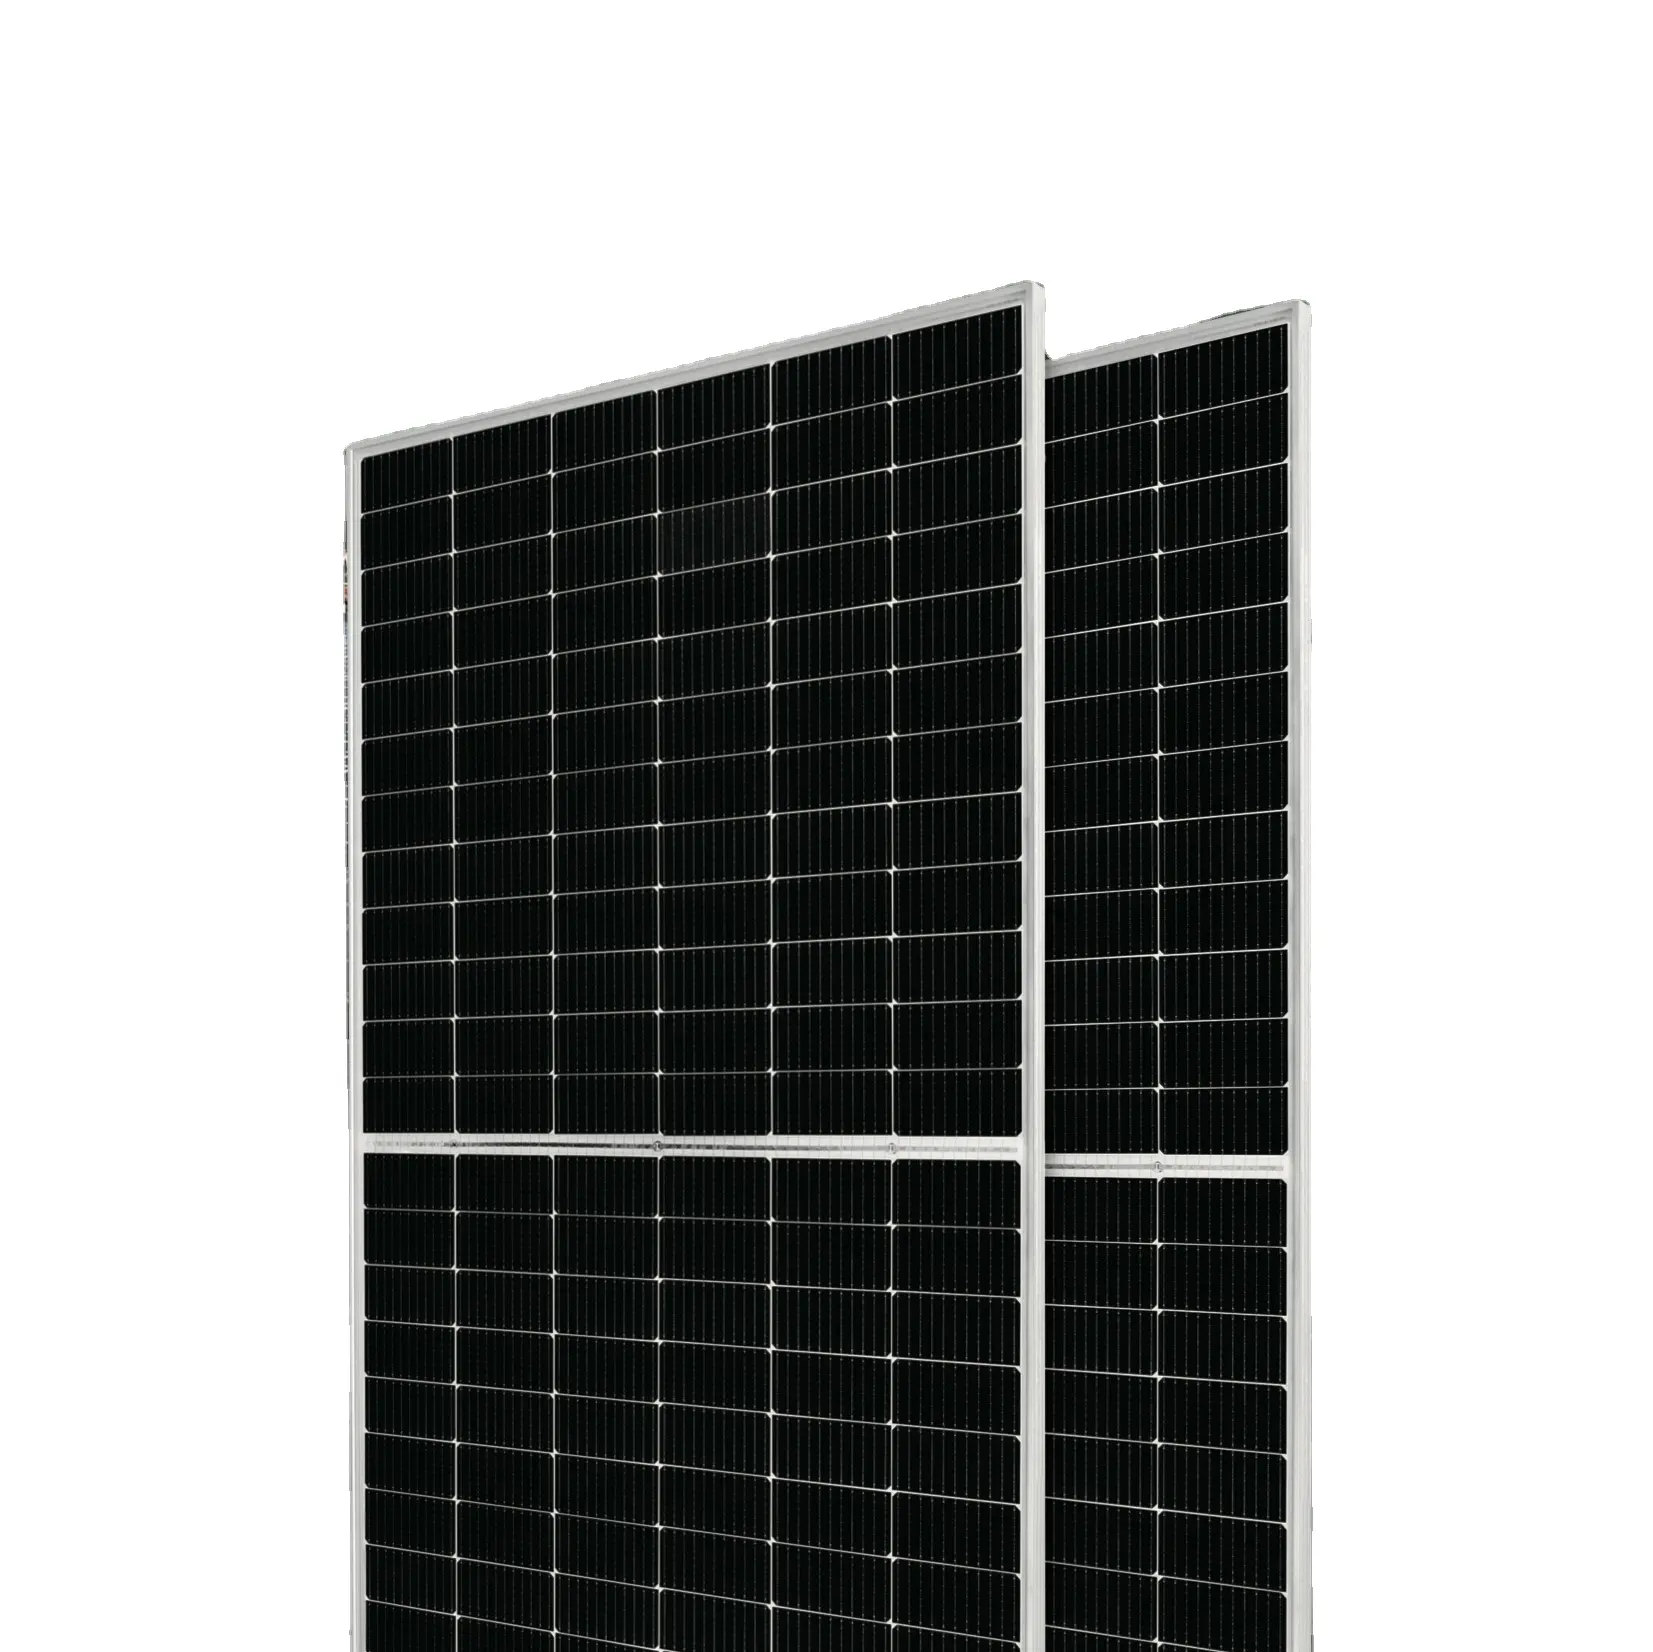 Ready stock sale JA525W 530W 535W 540W 545W 550W JA Solar Panel 545W 550W for solar energy systems